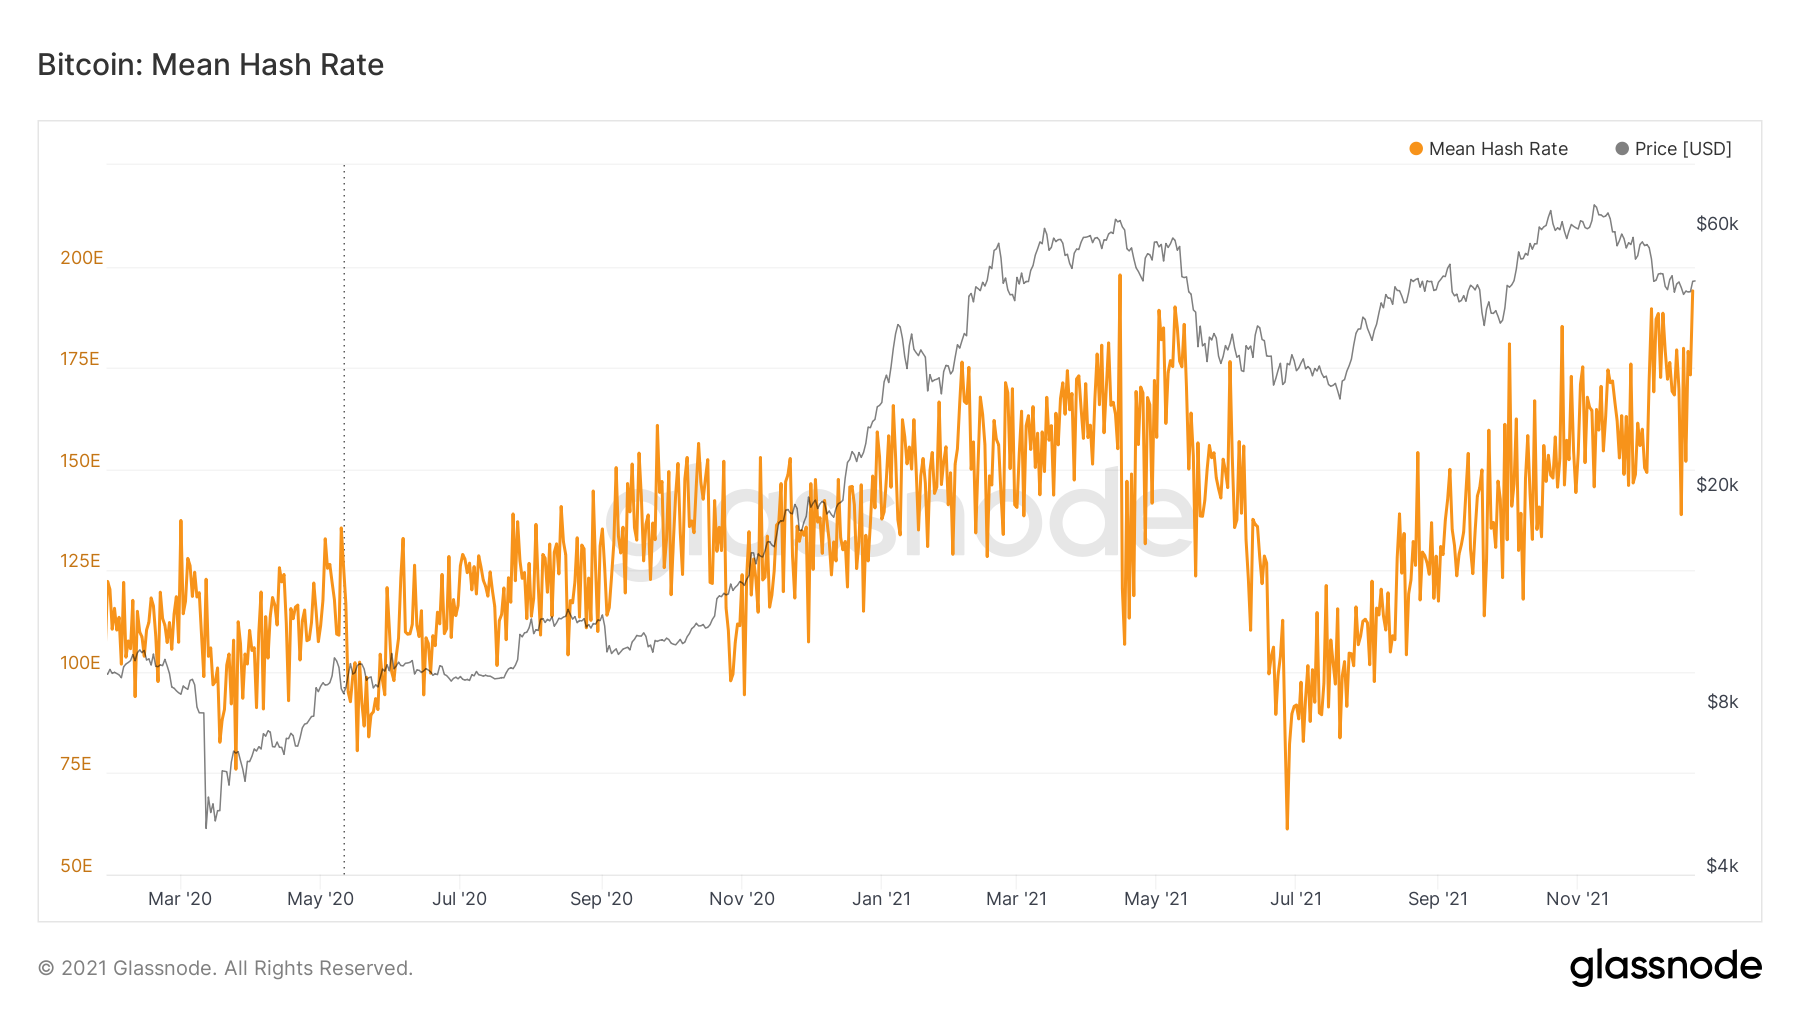 Bitcoin: Mean Hash Rate